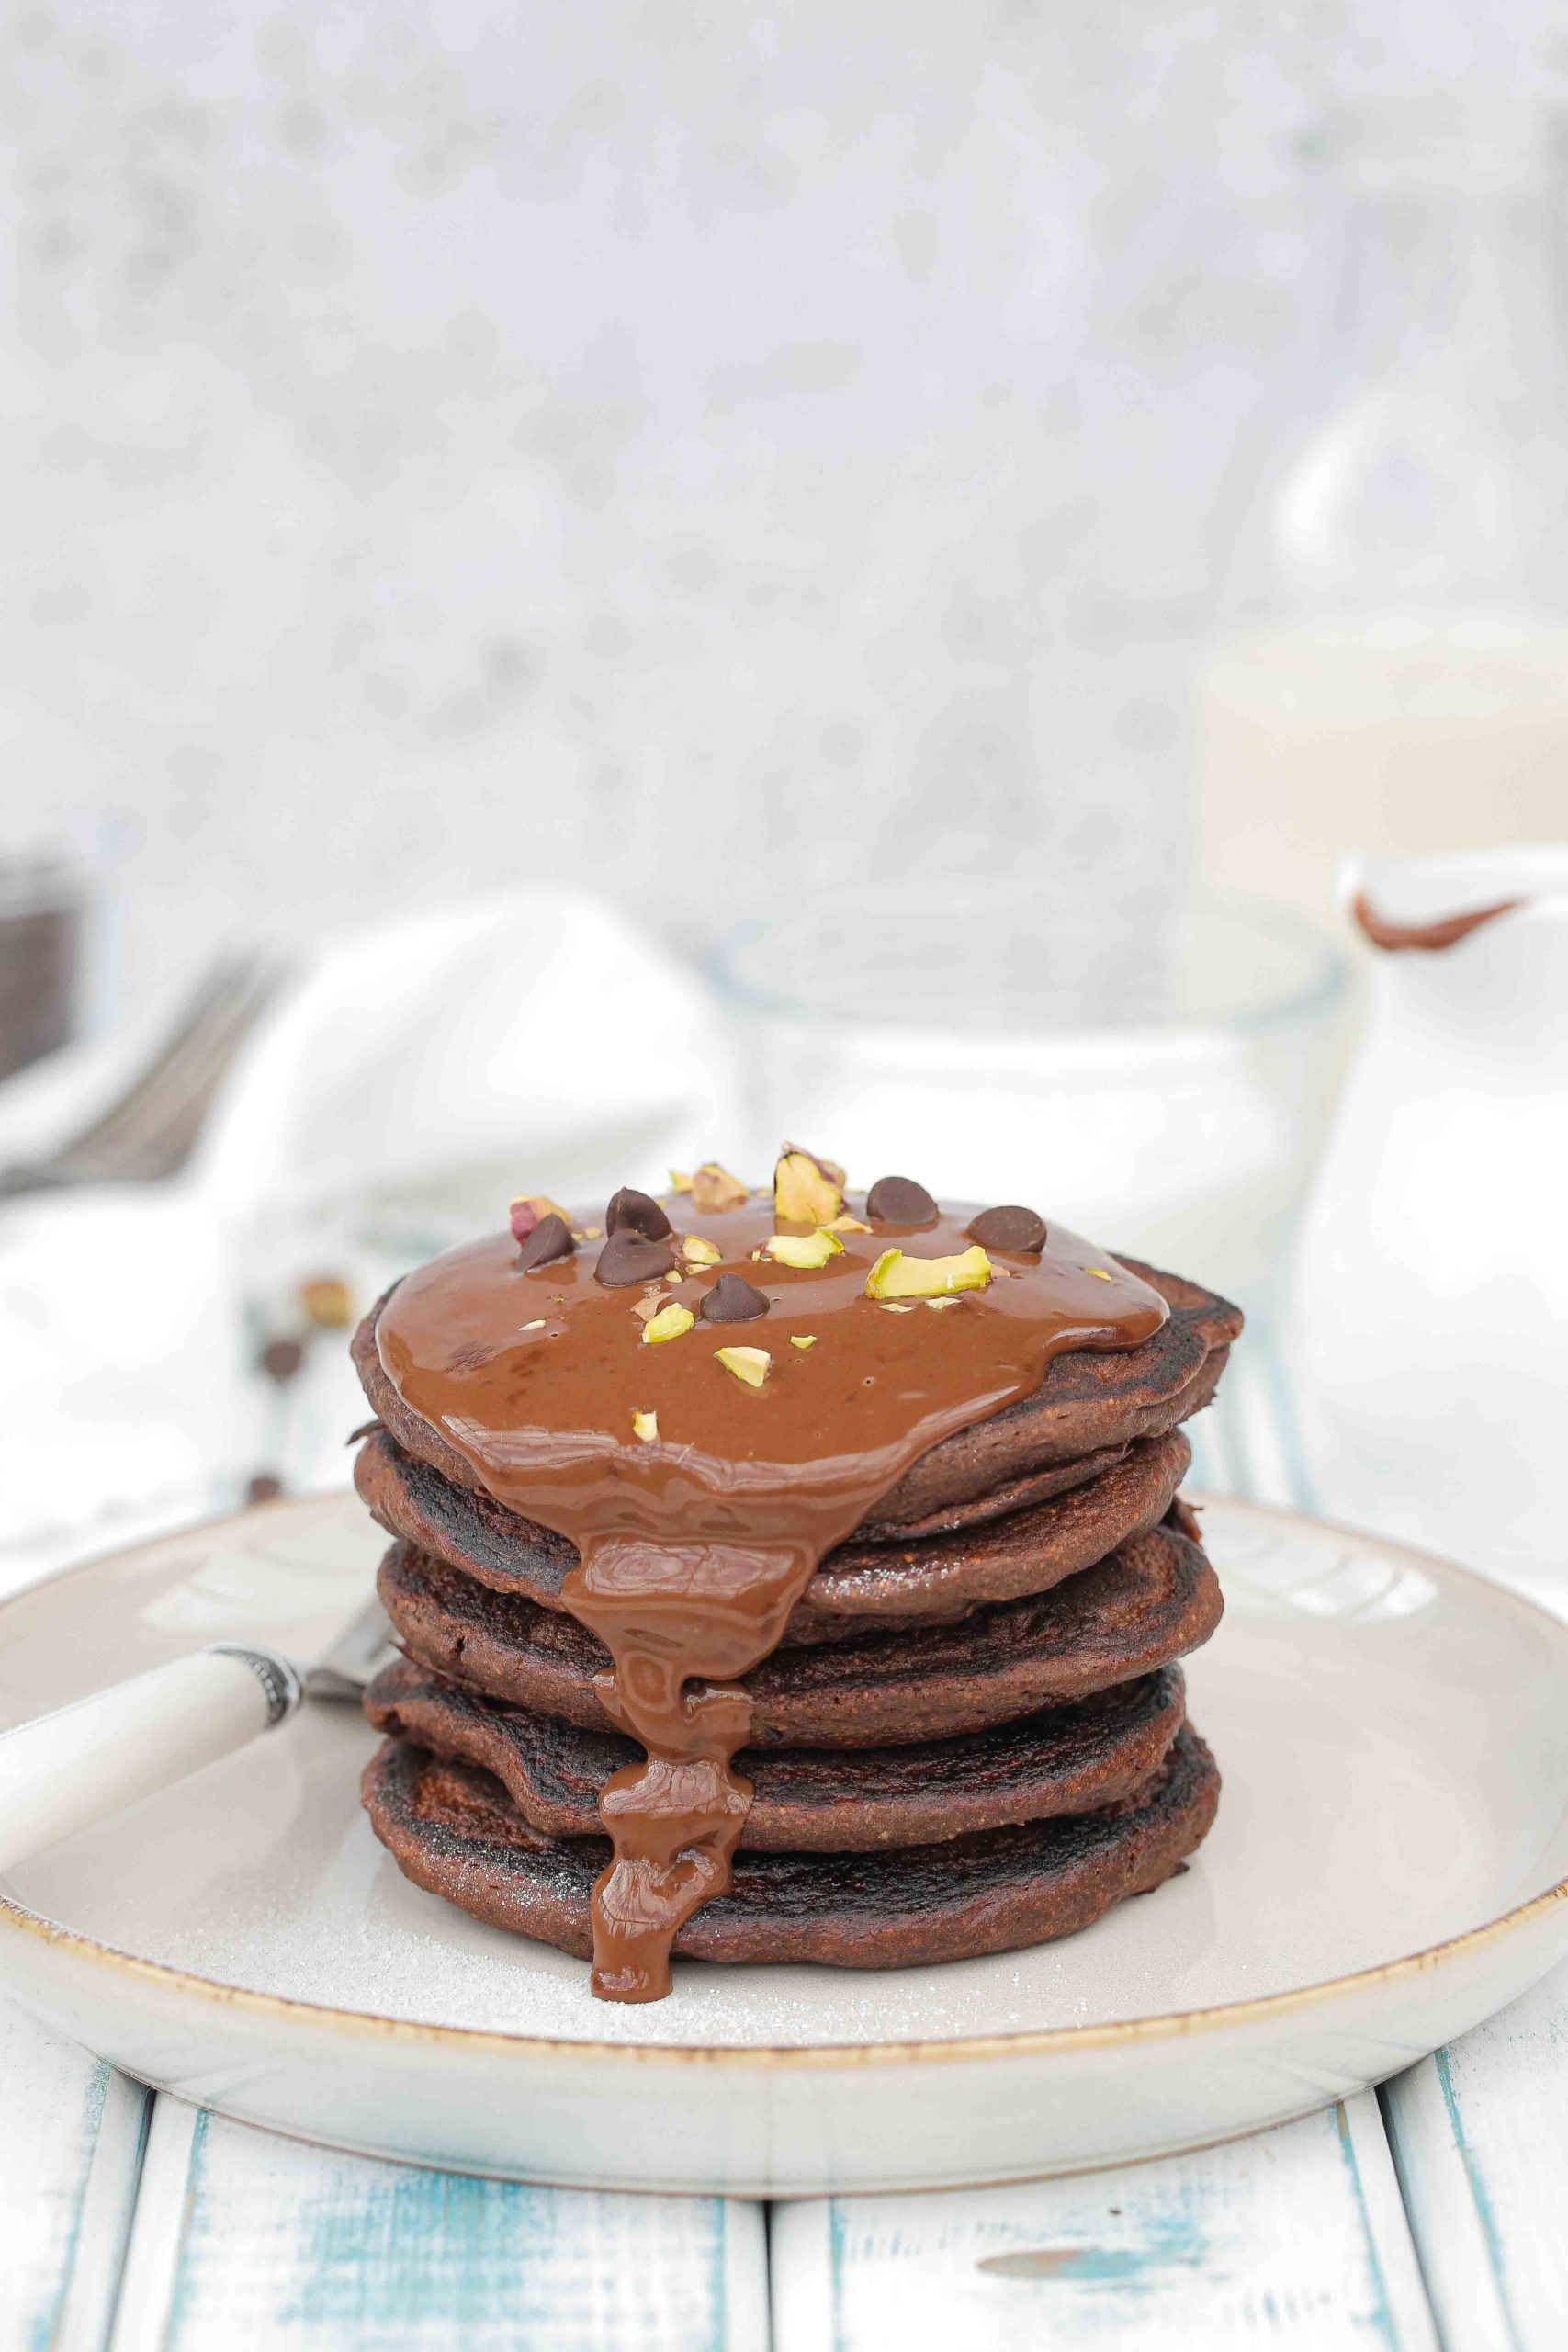 These easy vegan and gluten free chocolate pancakes are a chocolate lovers dream! Fluffy, full of rich cacao flavour and made with simple ingredients - including the divine chocolate sauce! Recipe on thecookandhim.com | #veganpancakes #veganbreakfast #chocolatepancakes #veganrecipes #glutenfree